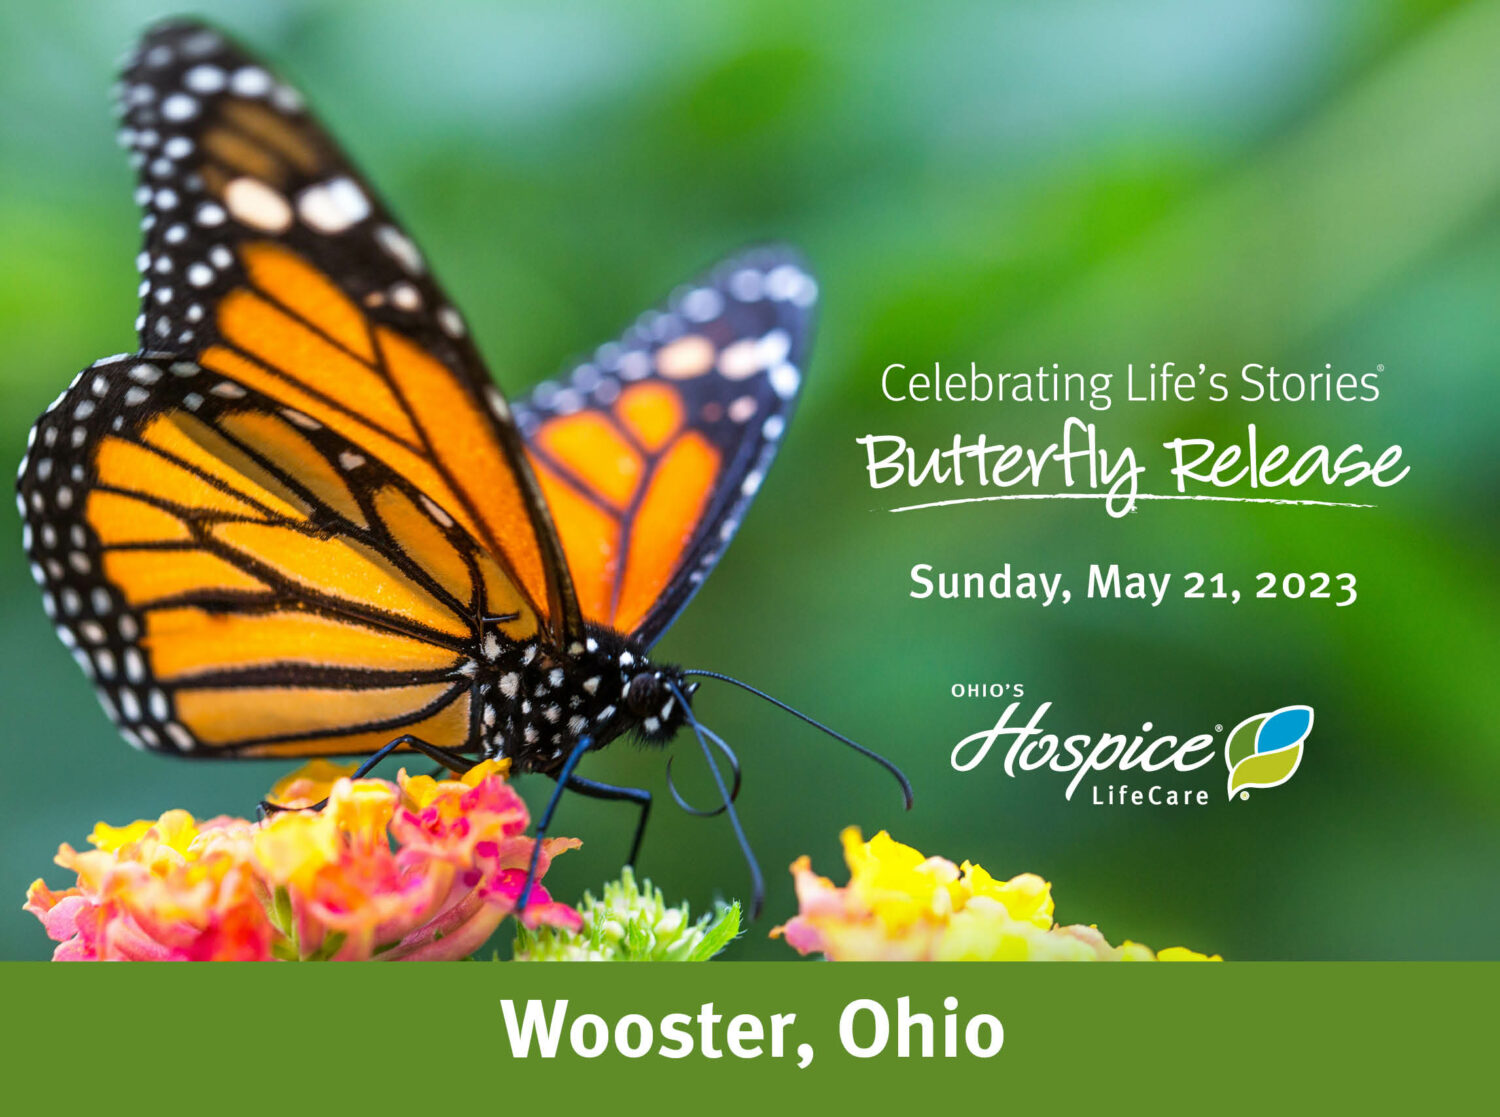 Celebrating Life's Stories Butterfly Release, Sunday, May 21, 2023, Ohio's Hospice LifeCare, Wooster, Ohio